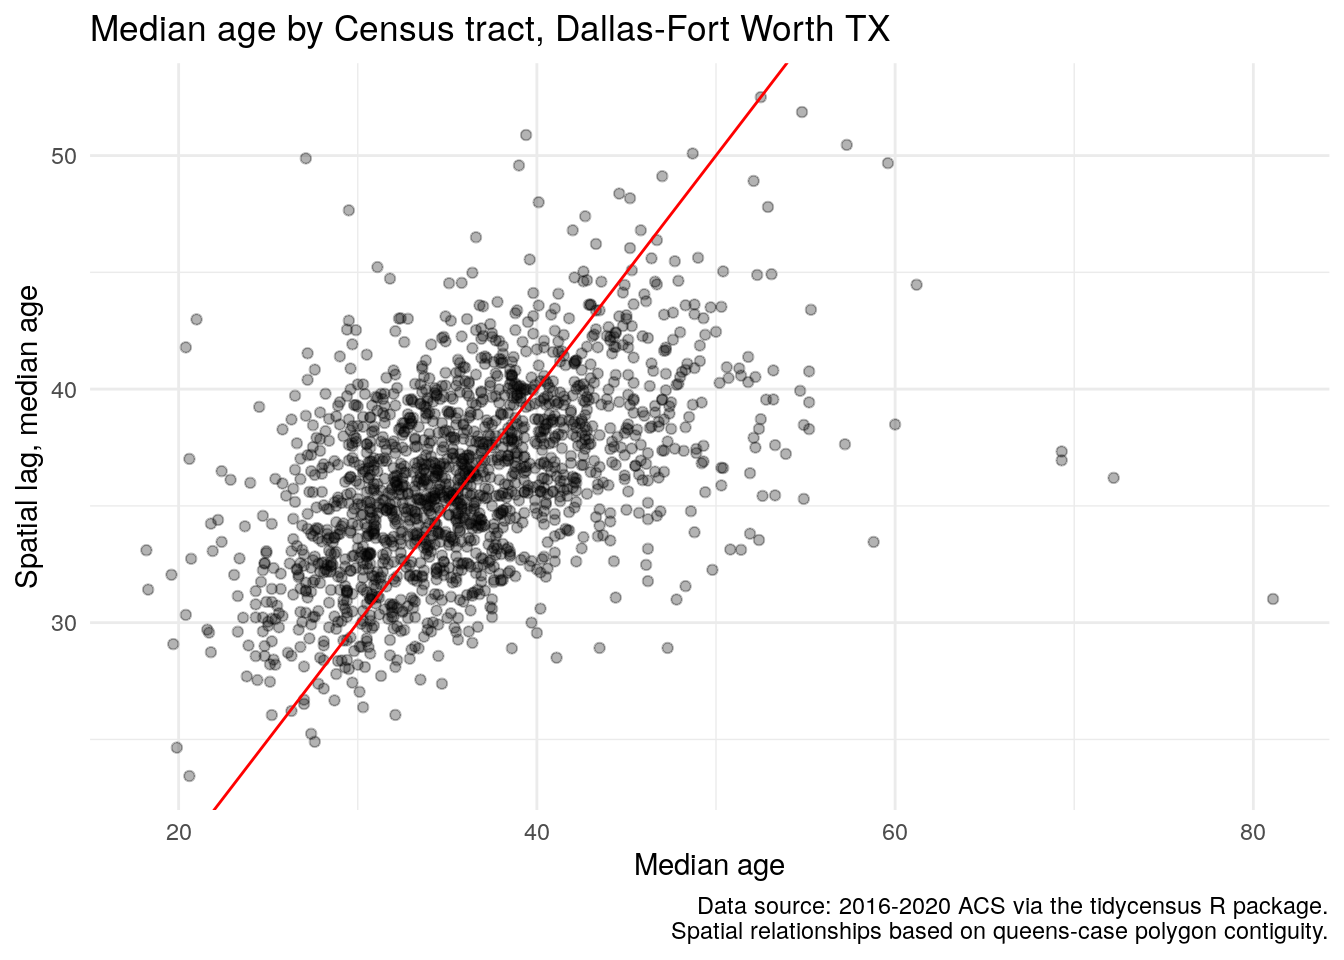 Scatterplot of median age relative to its spatial lag